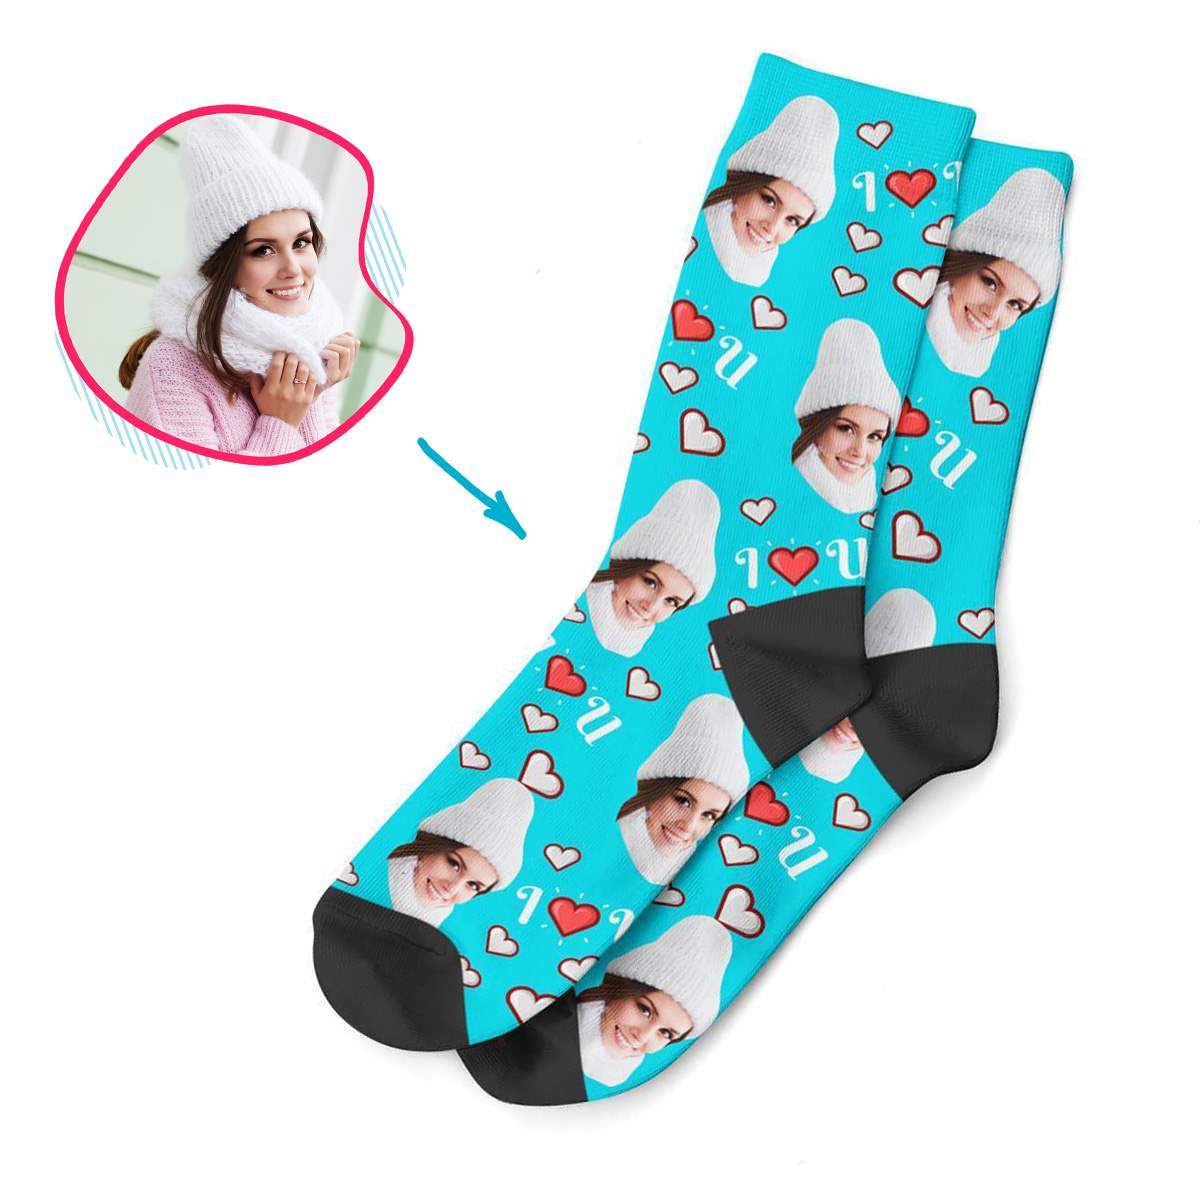 blue I <3 You socks personalized with photo of face printed on them